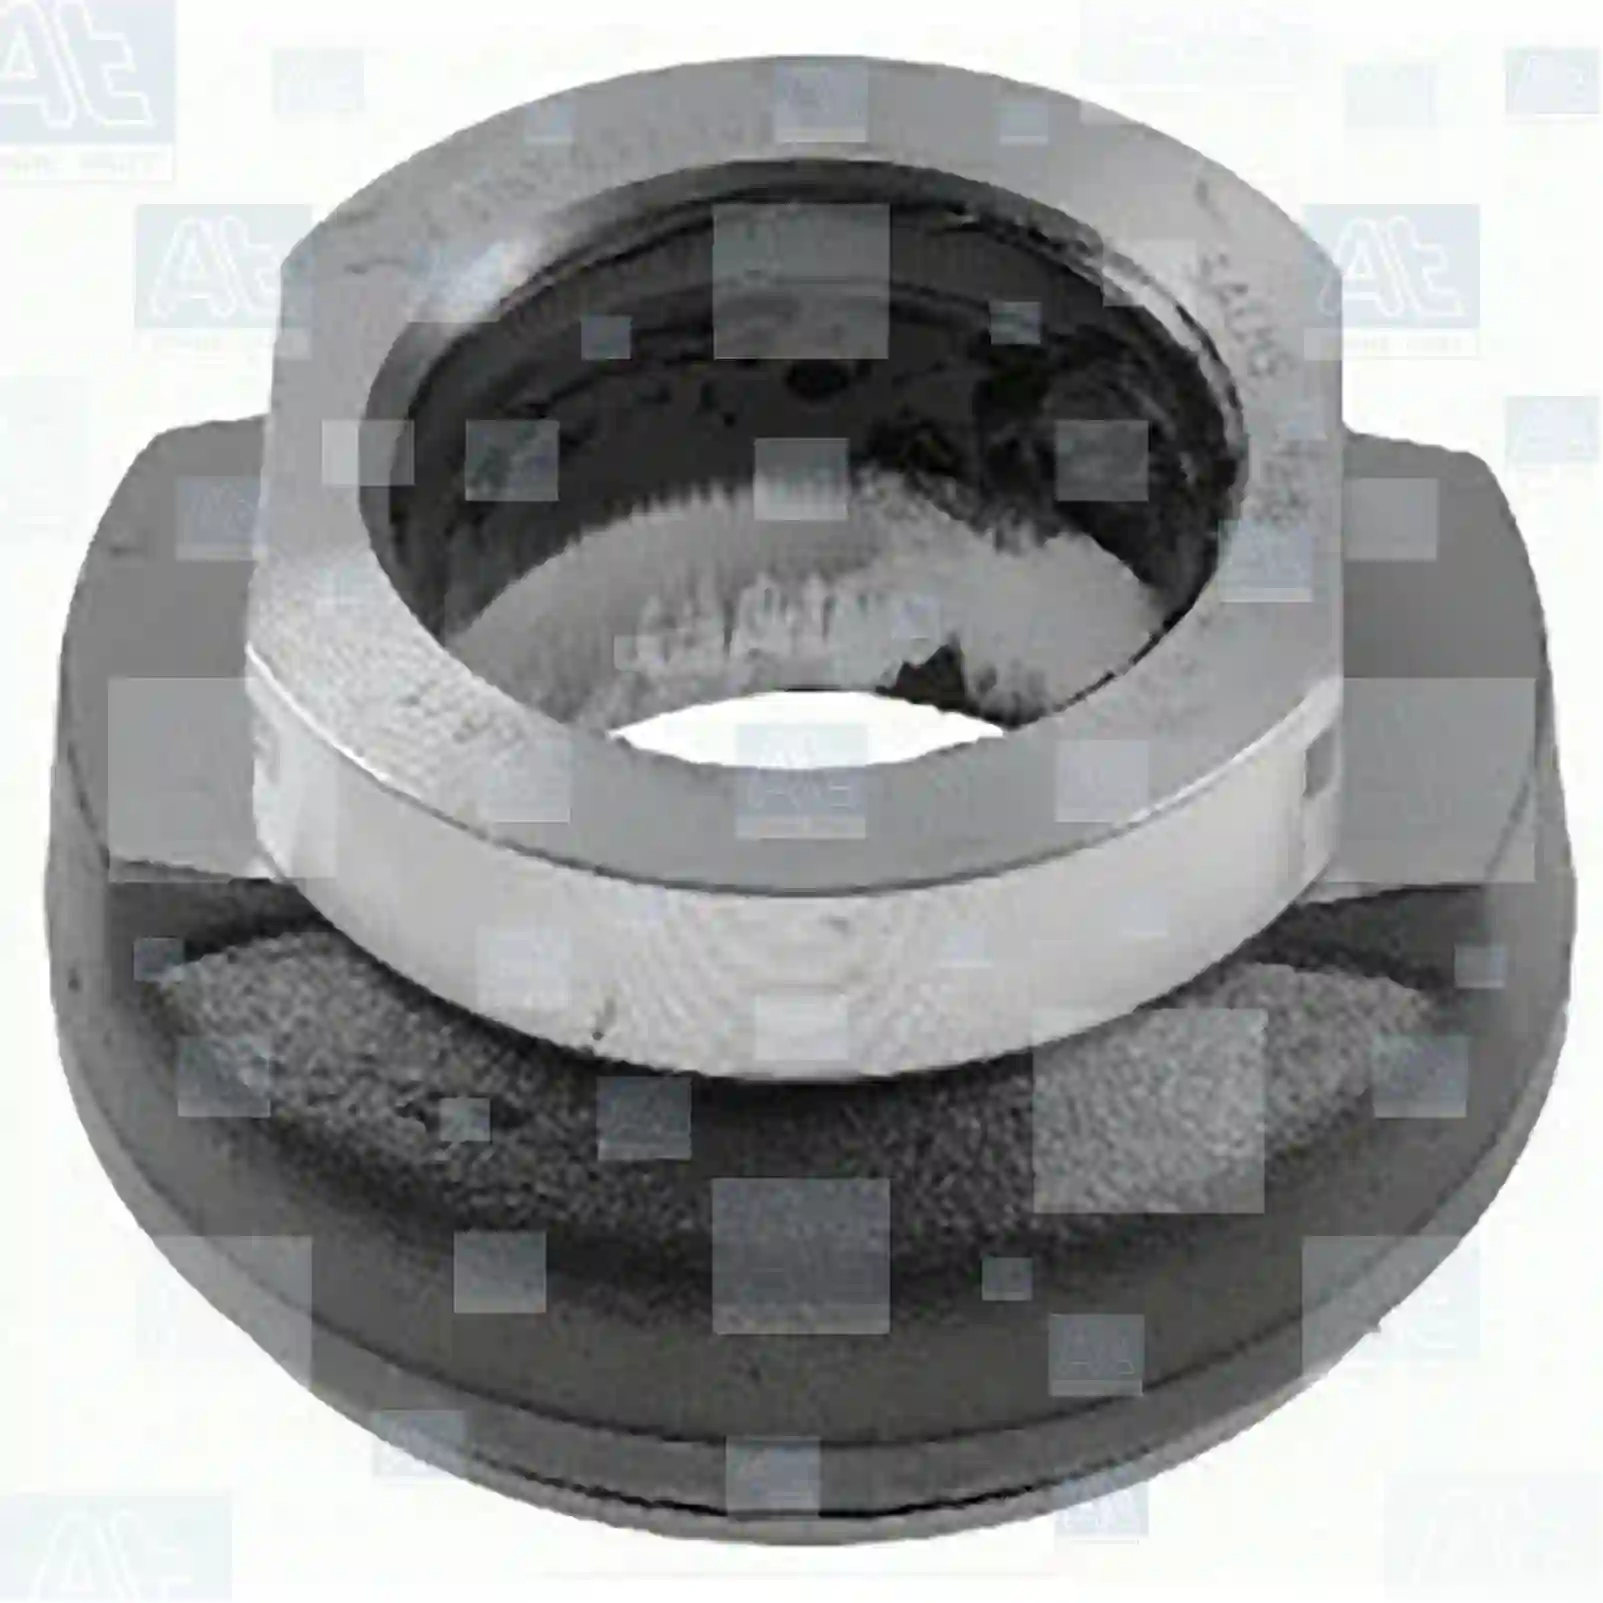 Release bearing, at no 77721929, oem no: 0113365, 113365, 01172721, 01903936, 02443133, 02475629, 42003473UE, 42003473US, 42003474, 42003658, 42026899, 01903899, 01903936, 02443133, 02475629, 02479048, 42003658, 42026898, 42026899, 42063184, 632100420, 00030196, 01172721, 02475629, 02479048, 42003473, 42003474, 42003658, 42026898, 42026899, 42063184, 632100420, 01172721, 01172721KZ8939-44, 1068415, 81305500035, 81305500049, ASF735482, 177841, 0011009734, 8383189000, 011009734, 040117200, 81305500049, 0001141035, 9532614001, 8383189000, 5290558, 2618559, 5304148, 5599230 At Spare Part | Engine, Accelerator Pedal, Camshaft, Connecting Rod, Crankcase, Crankshaft, Cylinder Head, Engine Suspension Mountings, Exhaust Manifold, Exhaust Gas Recirculation, Filter Kits, Flywheel Housing, General Overhaul Kits, Engine, Intake Manifold, Oil Cleaner, Oil Cooler, Oil Filter, Oil Pump, Oil Sump, Piston & Liner, Sensor & Switch, Timing Case, Turbocharger, Cooling System, Belt Tensioner, Coolant Filter, Coolant Pipe, Corrosion Prevention Agent, Drive, Expansion Tank, Fan, Intercooler, Monitors & Gauges, Radiator, Thermostat, V-Belt / Timing belt, Water Pump, Fuel System, Electronical Injector Unit, Feed Pump, Fuel Filter, cpl., Fuel Gauge Sender,  Fuel Line, Fuel Pump, Fuel Tank, Injection Line Kit, Injection Pump, Exhaust System, Clutch & Pedal, Gearbox, Propeller Shaft, Axles, Brake System, Hubs & Wheels, Suspension, Leaf Spring, Universal Parts / Accessories, Steering, Electrical System, Cabin Release bearing, at no 77721929, oem no: 0113365, 113365, 01172721, 01903936, 02443133, 02475629, 42003473UE, 42003473US, 42003474, 42003658, 42026899, 01903899, 01903936, 02443133, 02475629, 02479048, 42003658, 42026898, 42026899, 42063184, 632100420, 00030196, 01172721, 02475629, 02479048, 42003473, 42003474, 42003658, 42026898, 42026899, 42063184, 632100420, 01172721, 01172721KZ8939-44, 1068415, 81305500035, 81305500049, ASF735482, 177841, 0011009734, 8383189000, 011009734, 040117200, 81305500049, 0001141035, 9532614001, 8383189000, 5290558, 2618559, 5304148, 5599230 At Spare Part | Engine, Accelerator Pedal, Camshaft, Connecting Rod, Crankcase, Crankshaft, Cylinder Head, Engine Suspension Mountings, Exhaust Manifold, Exhaust Gas Recirculation, Filter Kits, Flywheel Housing, General Overhaul Kits, Engine, Intake Manifold, Oil Cleaner, Oil Cooler, Oil Filter, Oil Pump, Oil Sump, Piston & Liner, Sensor & Switch, Timing Case, Turbocharger, Cooling System, Belt Tensioner, Coolant Filter, Coolant Pipe, Corrosion Prevention Agent, Drive, Expansion Tank, Fan, Intercooler, Monitors & Gauges, Radiator, Thermostat, V-Belt / Timing belt, Water Pump, Fuel System, Electronical Injector Unit, Feed Pump, Fuel Filter, cpl., Fuel Gauge Sender,  Fuel Line, Fuel Pump, Fuel Tank, Injection Line Kit, Injection Pump, Exhaust System, Clutch & Pedal, Gearbox, Propeller Shaft, Axles, Brake System, Hubs & Wheels, Suspension, Leaf Spring, Universal Parts / Accessories, Steering, Electrical System, Cabin